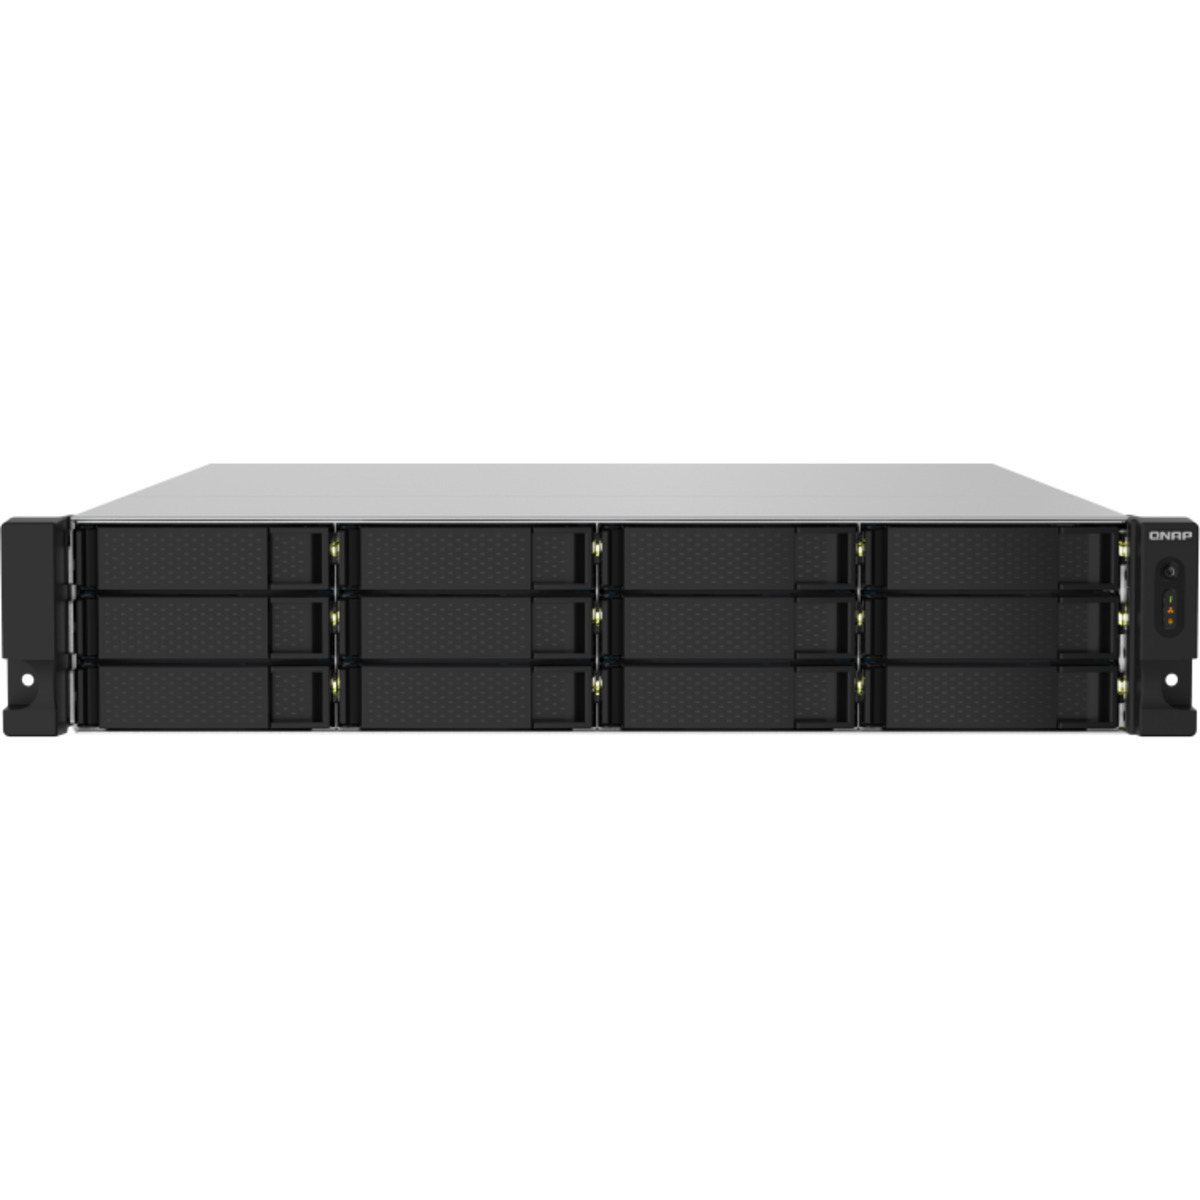 QNAP TS-1232PXU-RP 128tb 12-Bay RackMount Personal / Basic Home / Small Office NAS - Network Attached Storage Device 8x16tb Seagate EXOS X18 ST16000NM000J 3.5 7200rpm SATA 6Gb/s HDD ENTERPRISE Class Drives Installed - Burn-In Tested - FREE RAM UPGRADE TS-1232PXU-RP